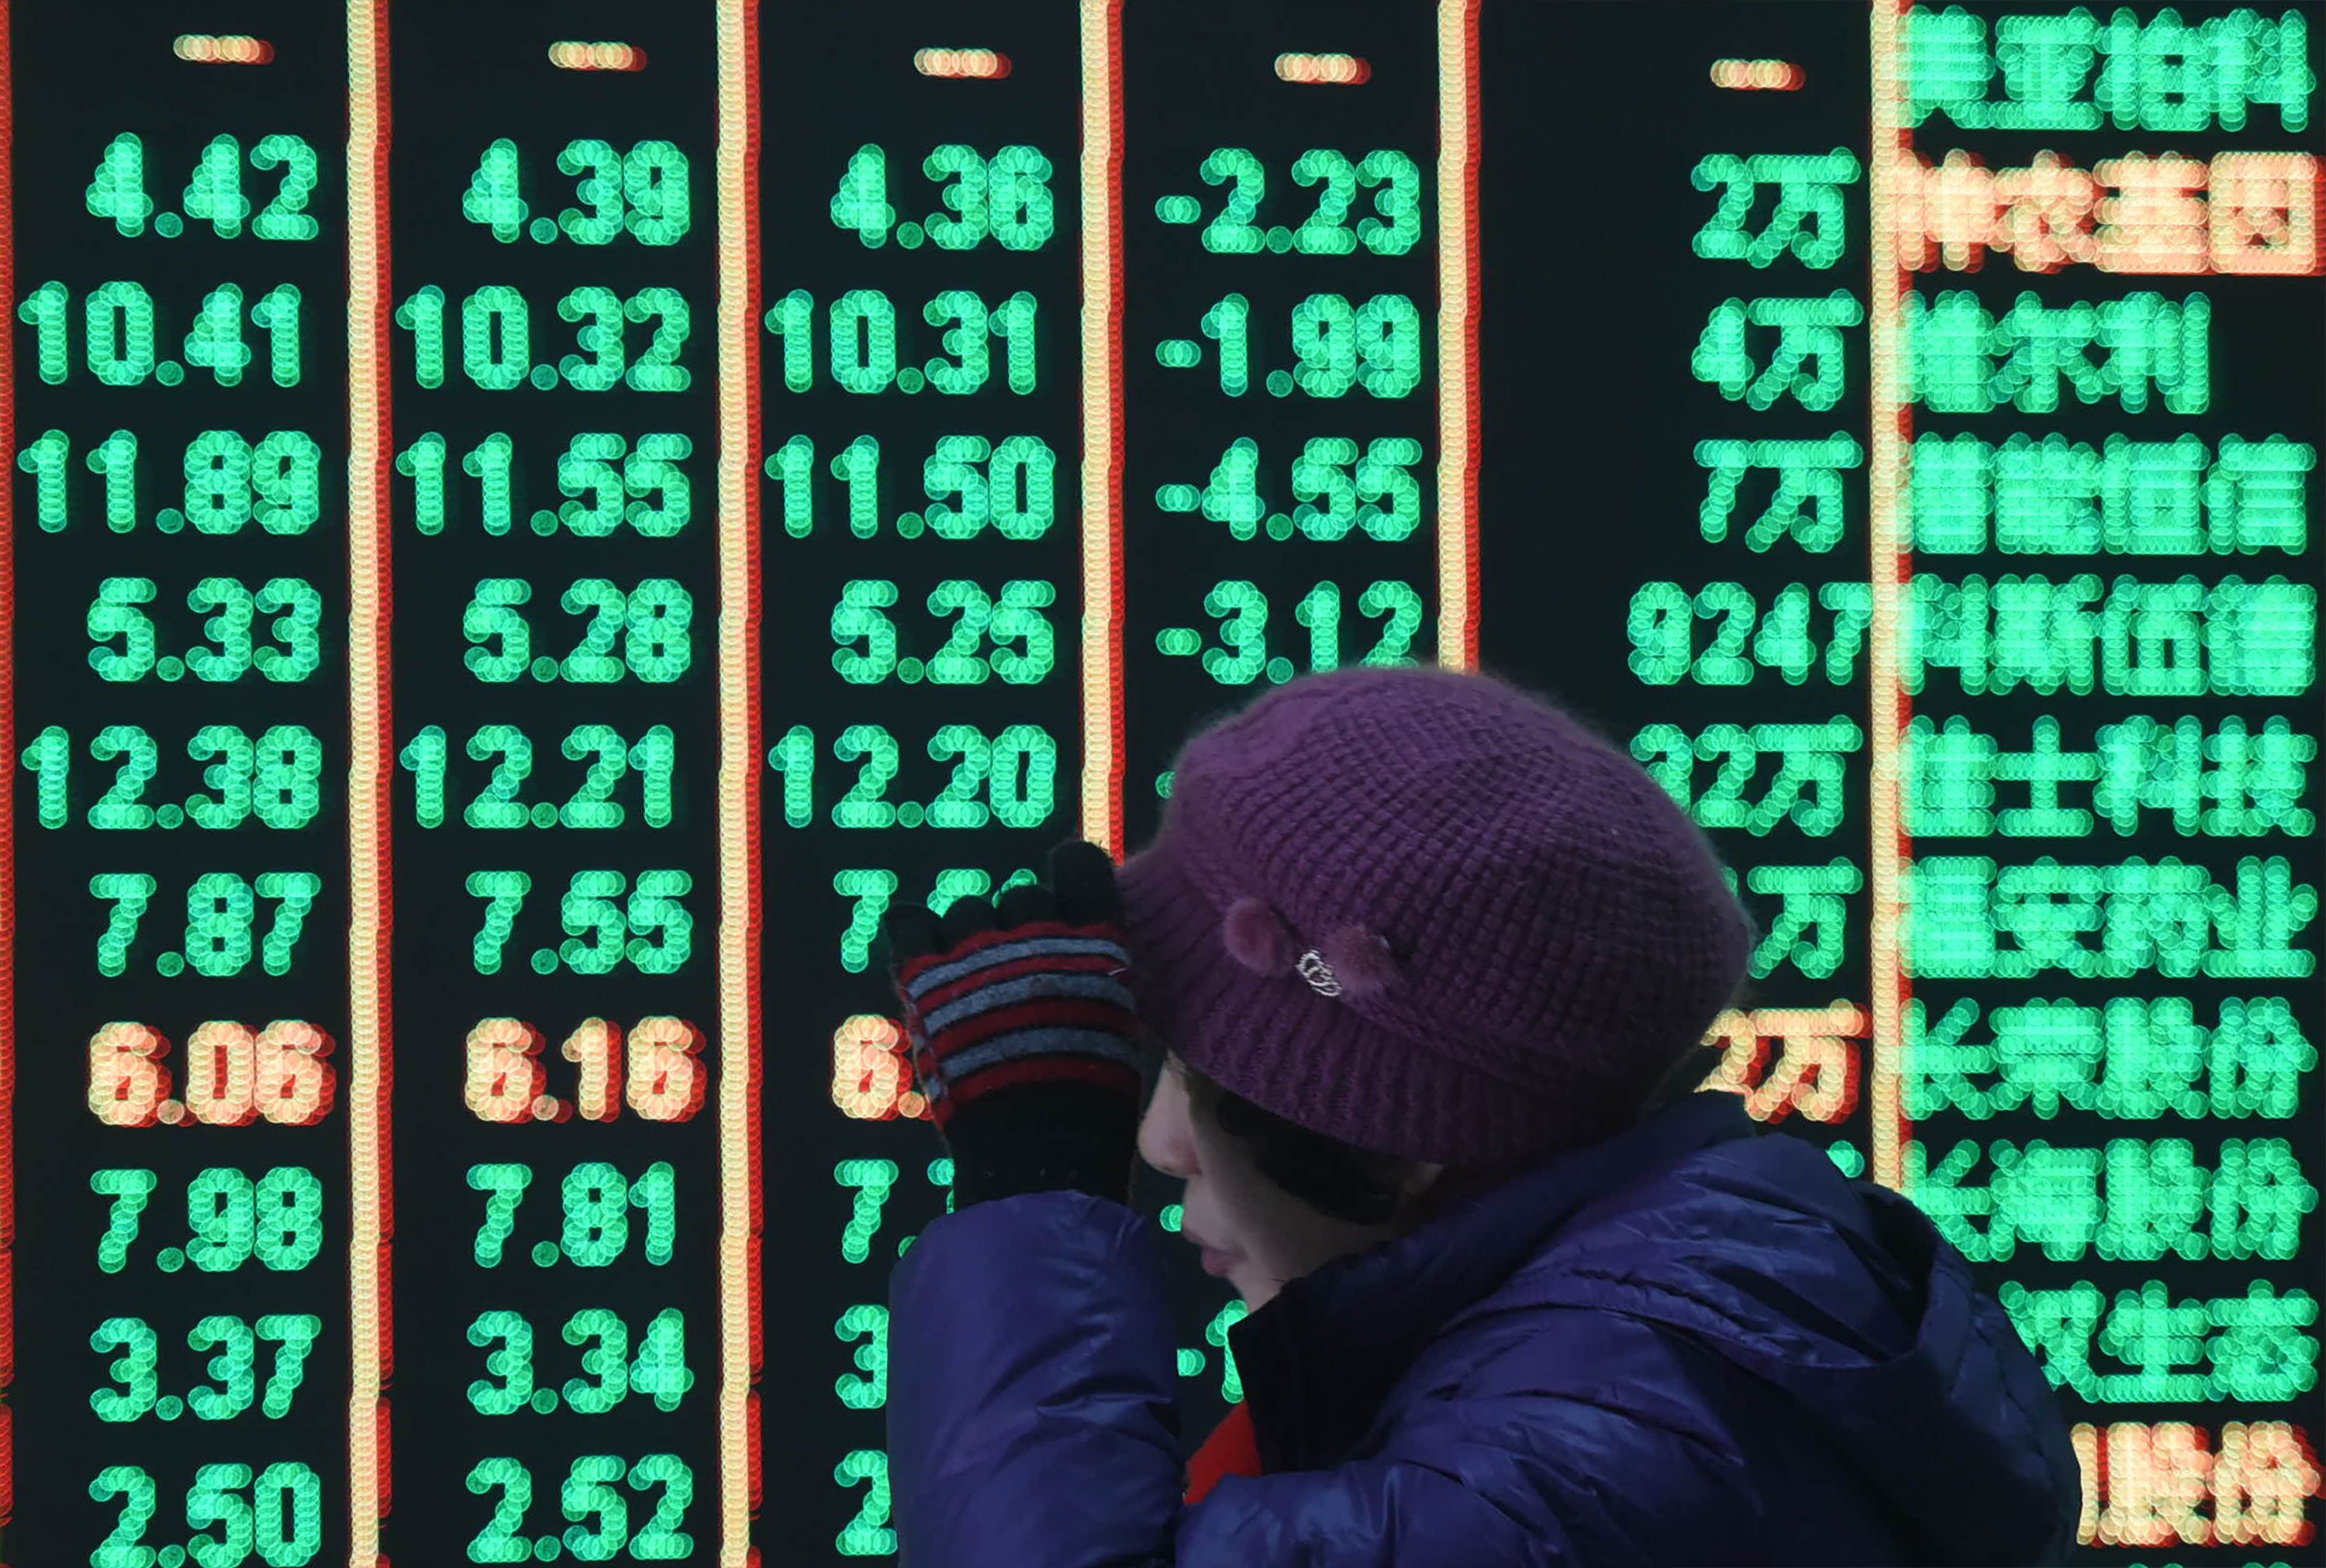 China’s stock market is floundering while the US’ is reaching new heights, prompting calls for deep changes to arrest the slide. Photo: Future Publishing via Getty Images